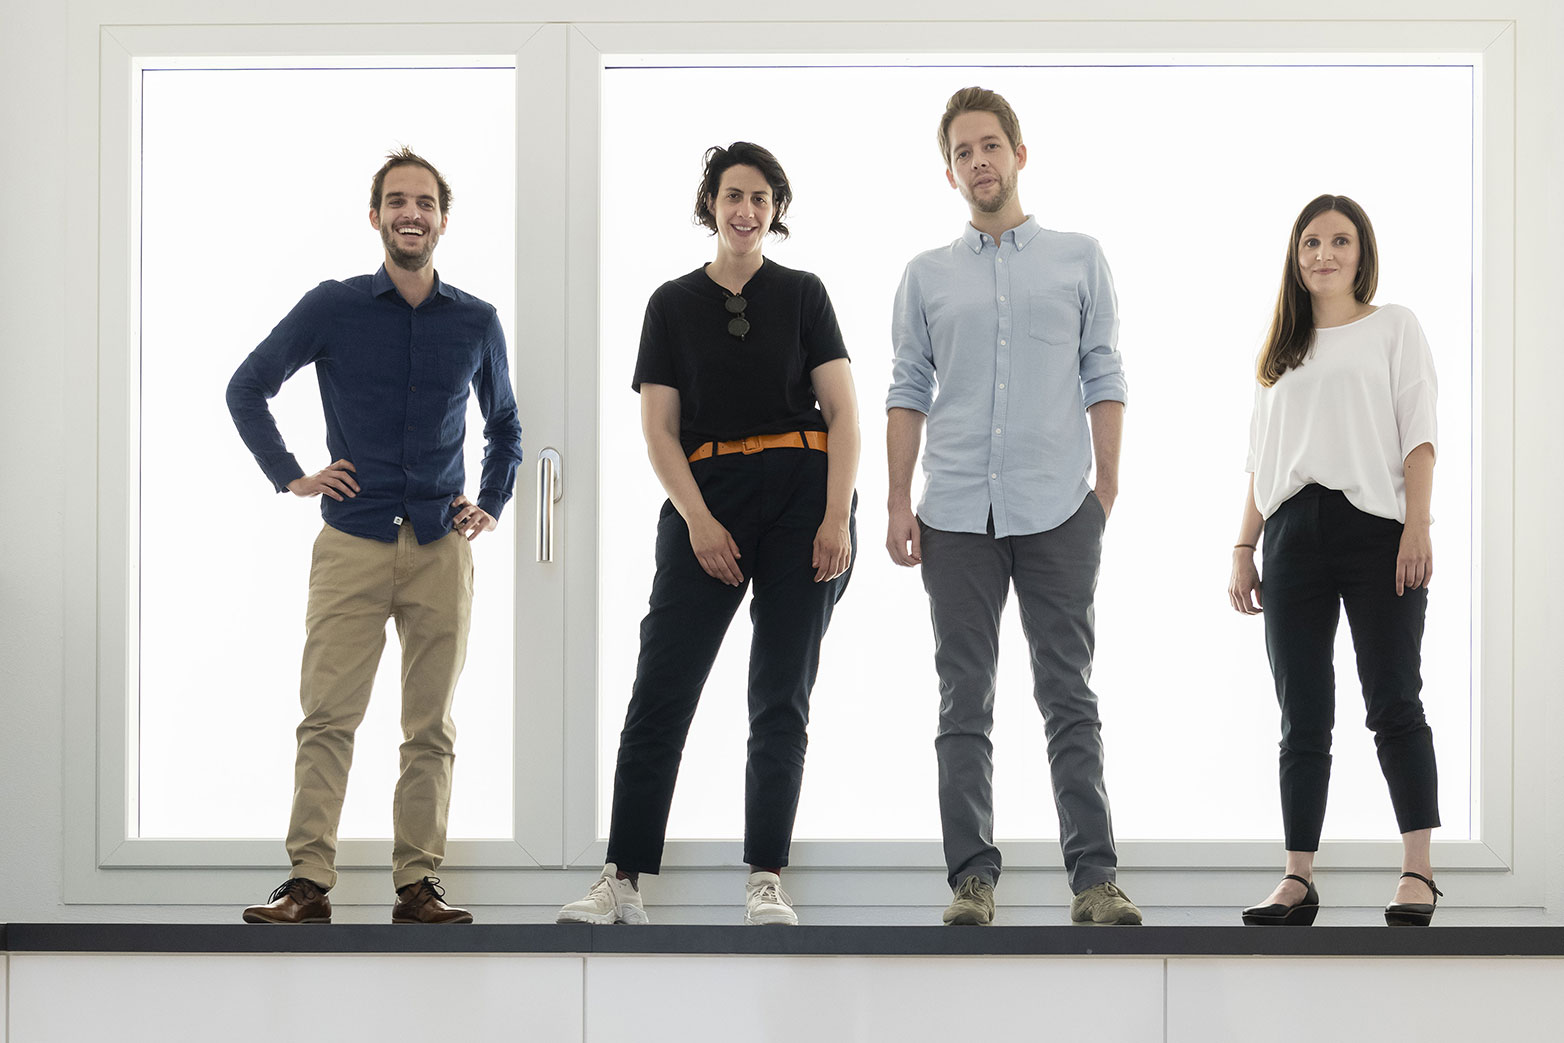 Enlarged view: The project team: (left to right) Alessandro Bosshard, Li Tavor, Matthew van der Ploeg and Ani Vihervaara. Bosshard, Tavor and van der Ploeg work at the Chair of Architecture and Urban Design; Vihervaara was in the Future Cities Laboratory at ETH Singapore and later at ETH Zurich. Photo: Christian Beutler, Keystone.